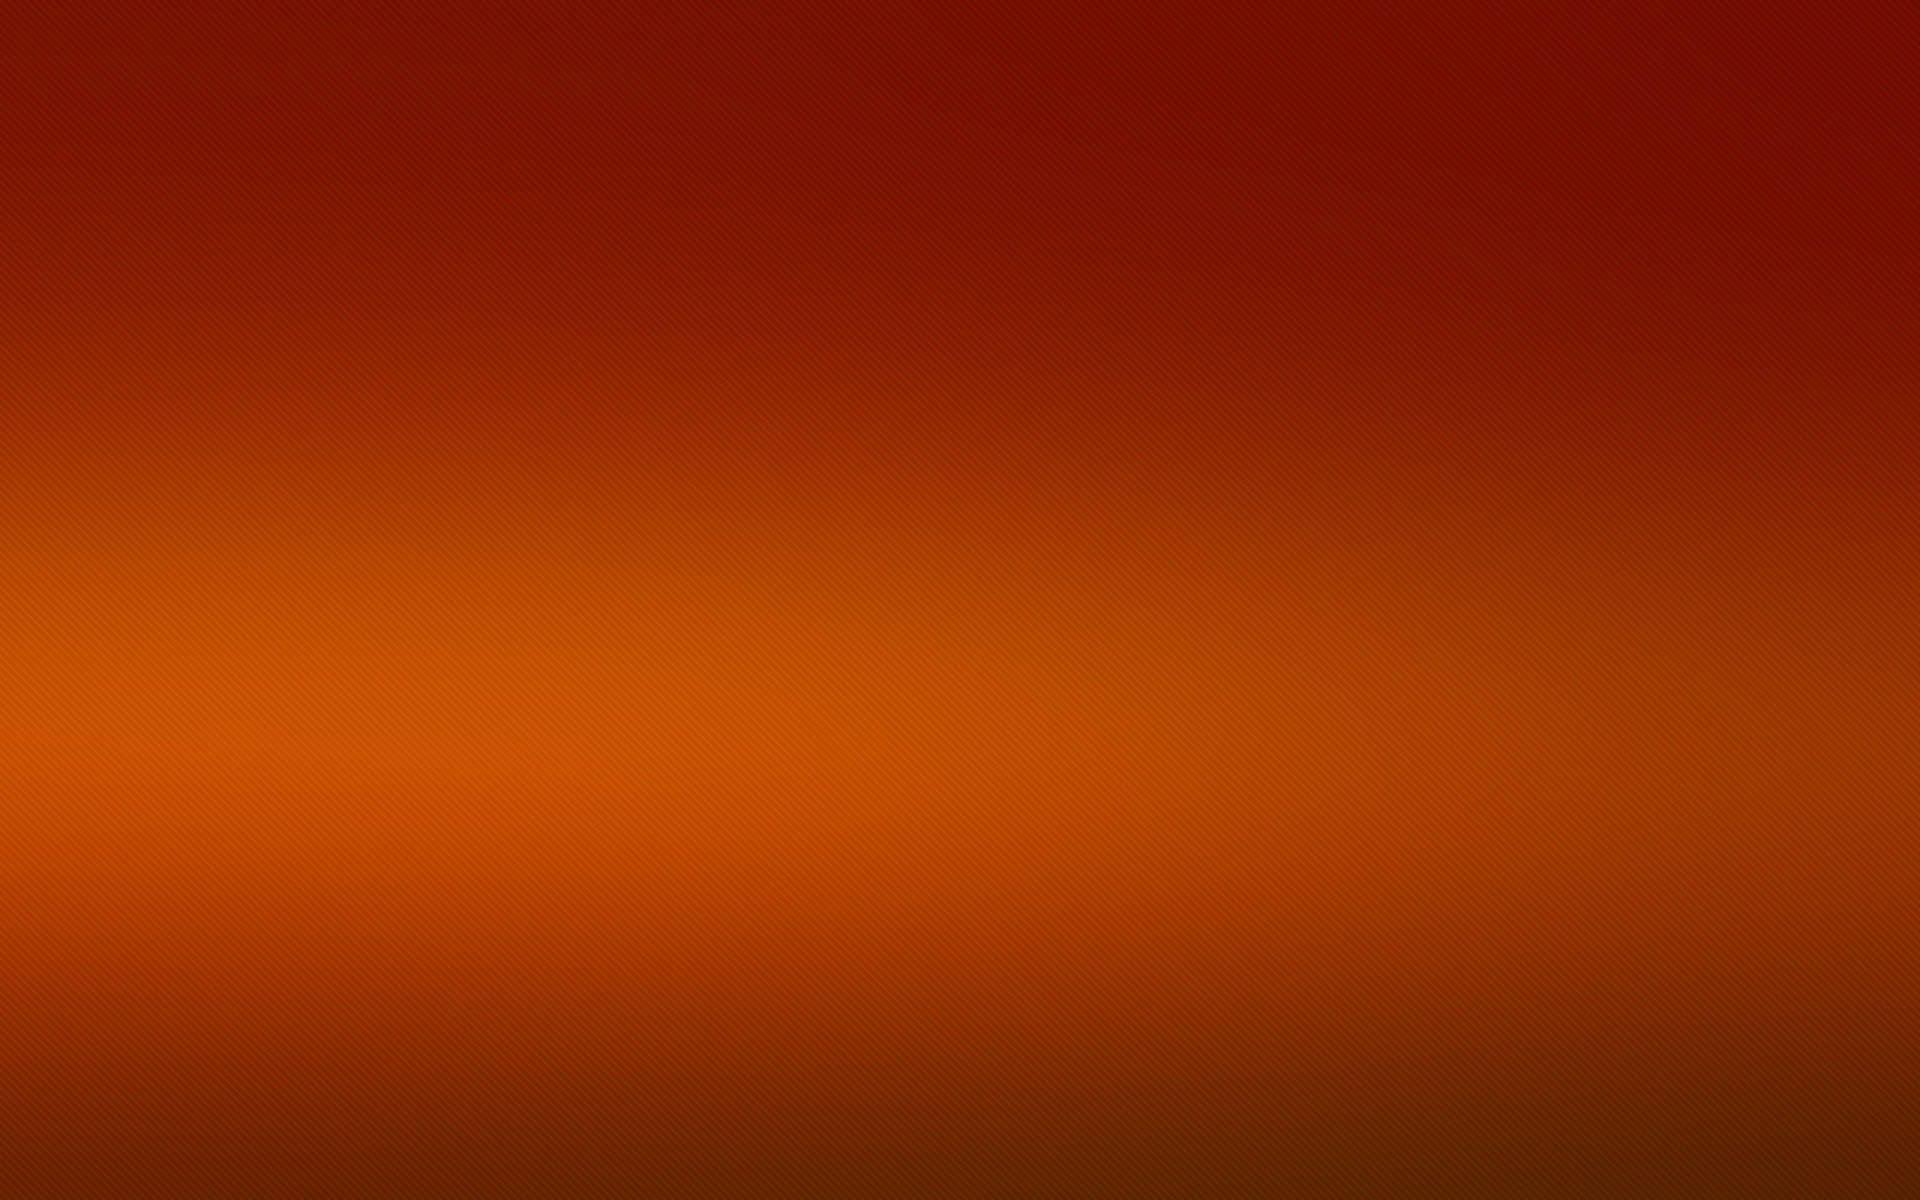 "Make a bold statement with a Solid Orange background" Wallpaper